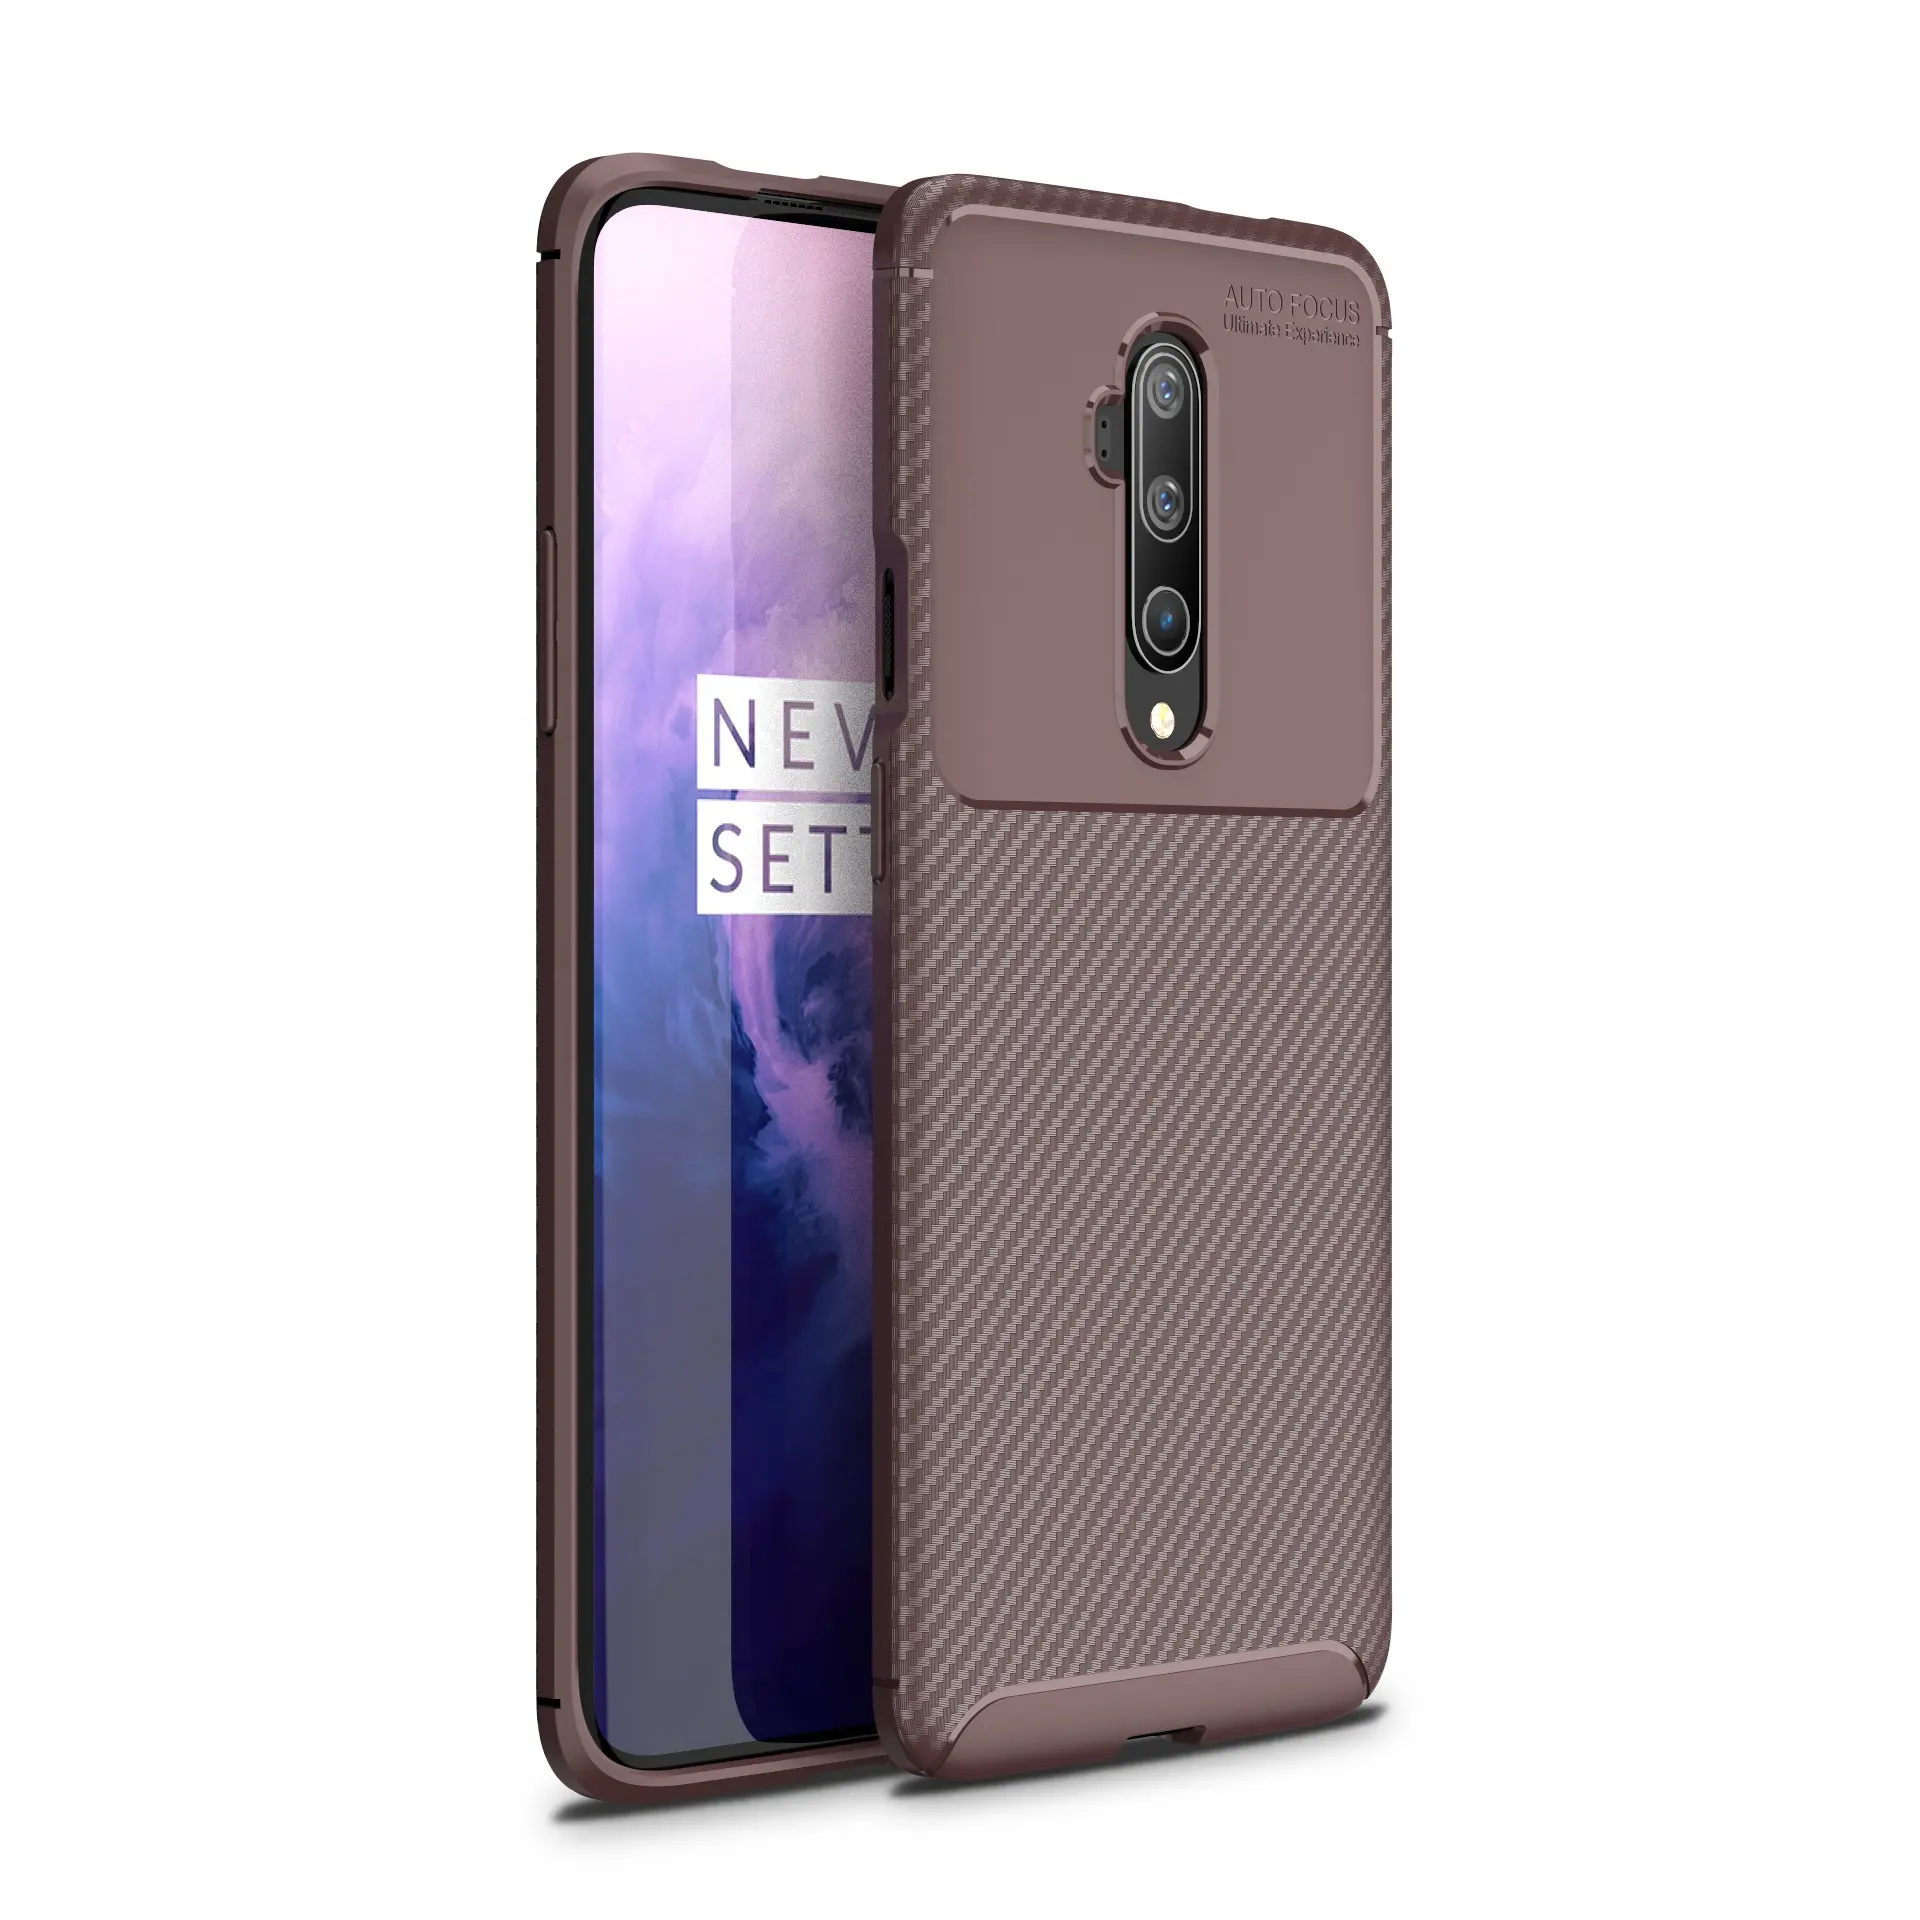 New Arrival Amazon High Quality TPU Mobile Phone Accessories Case cover for OnePlus 7T 1+7T Pro